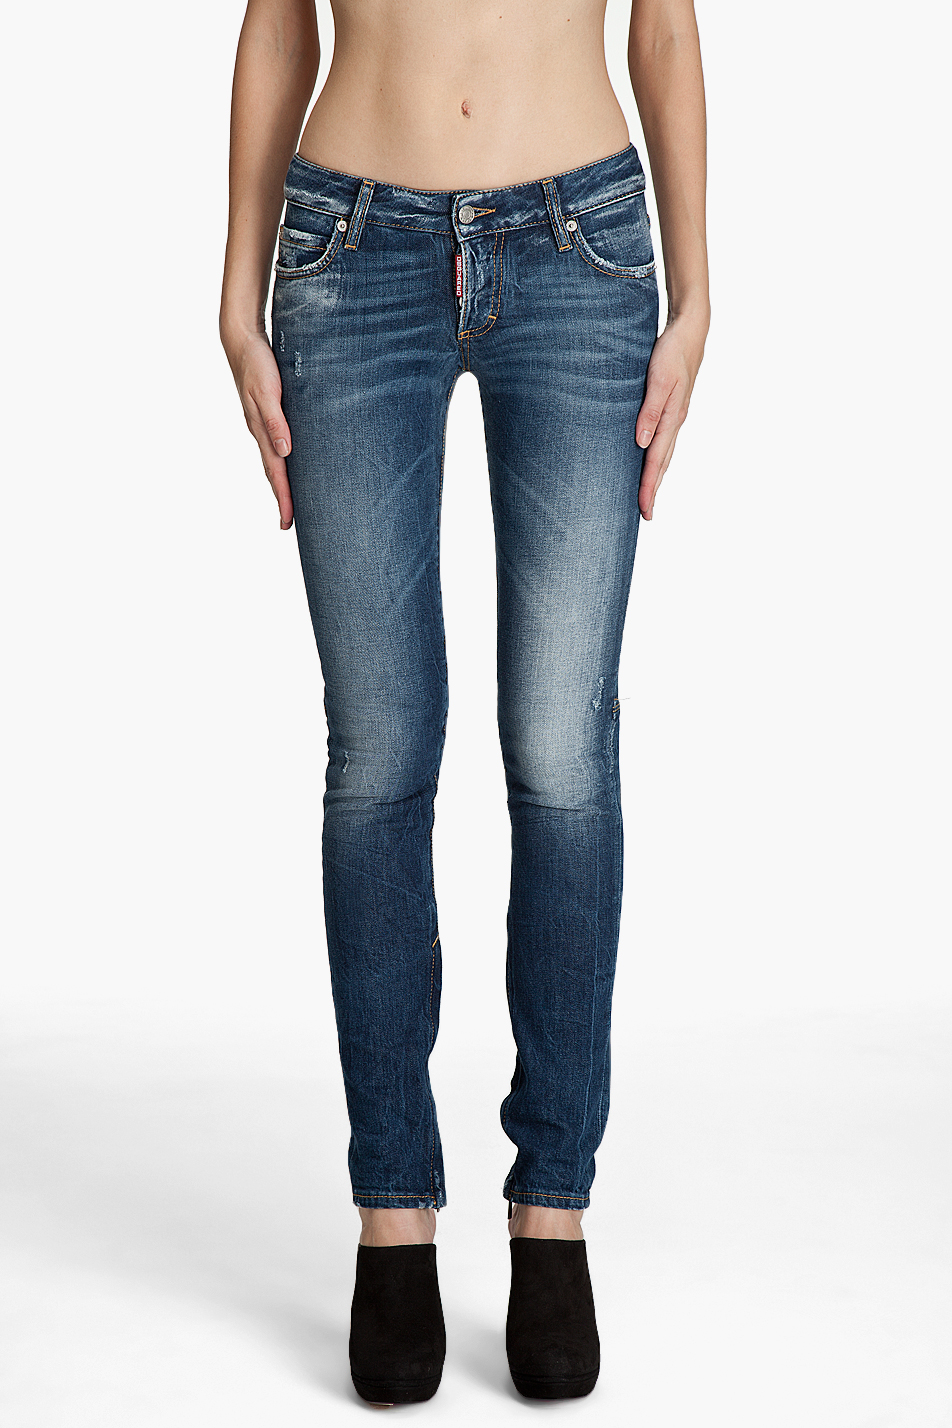 shop-mate: MNG SKINNY JEANS